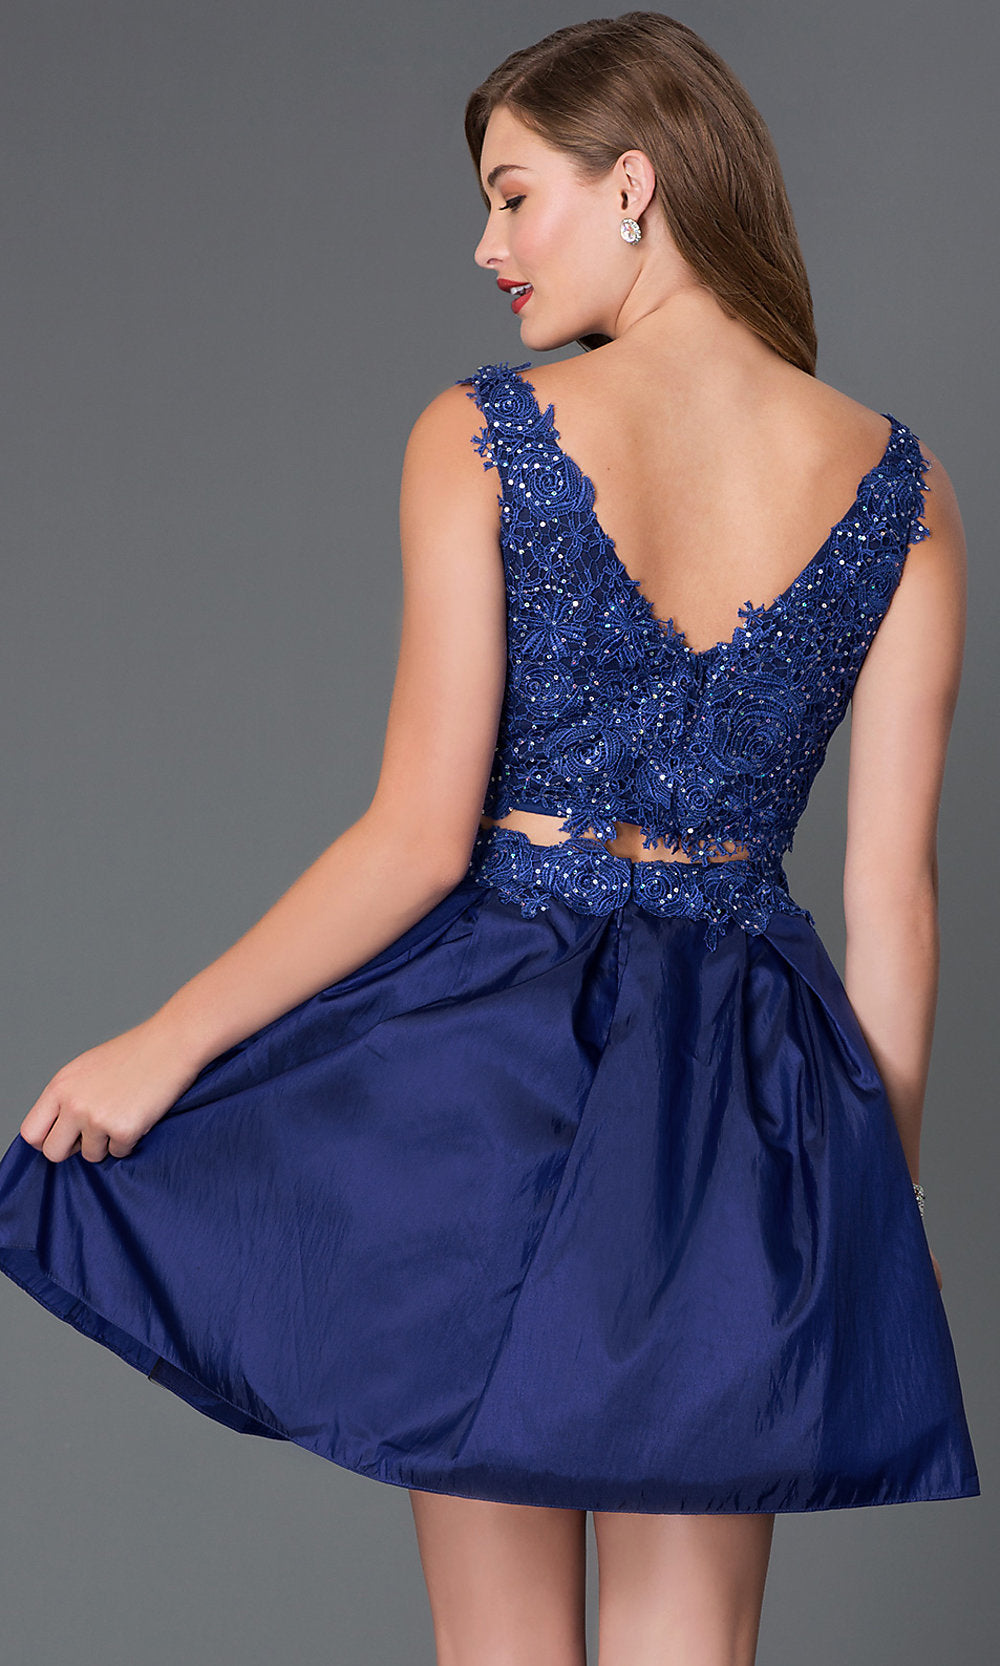  Short Two-Piece Party Dress with Lace Bodice